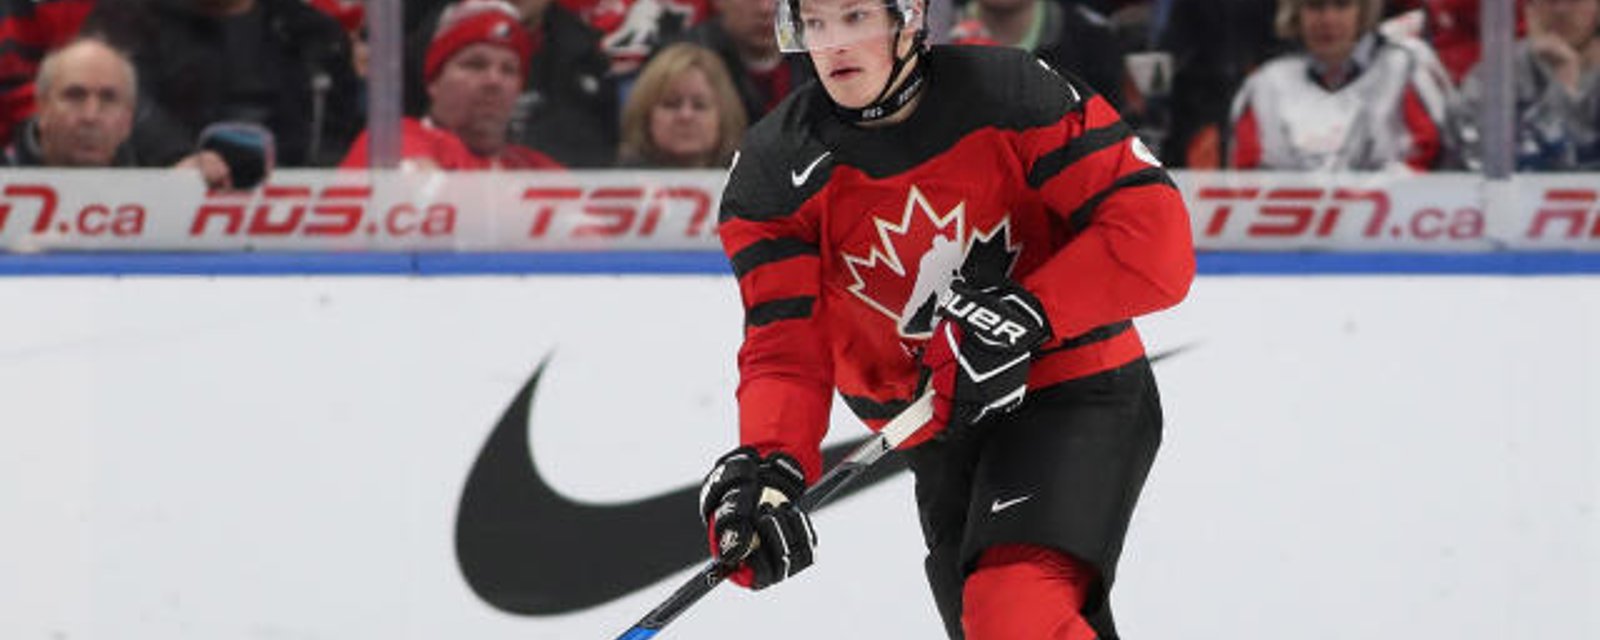 Cale Makar targets former 2018 World Junior teammates with comments on filed charges